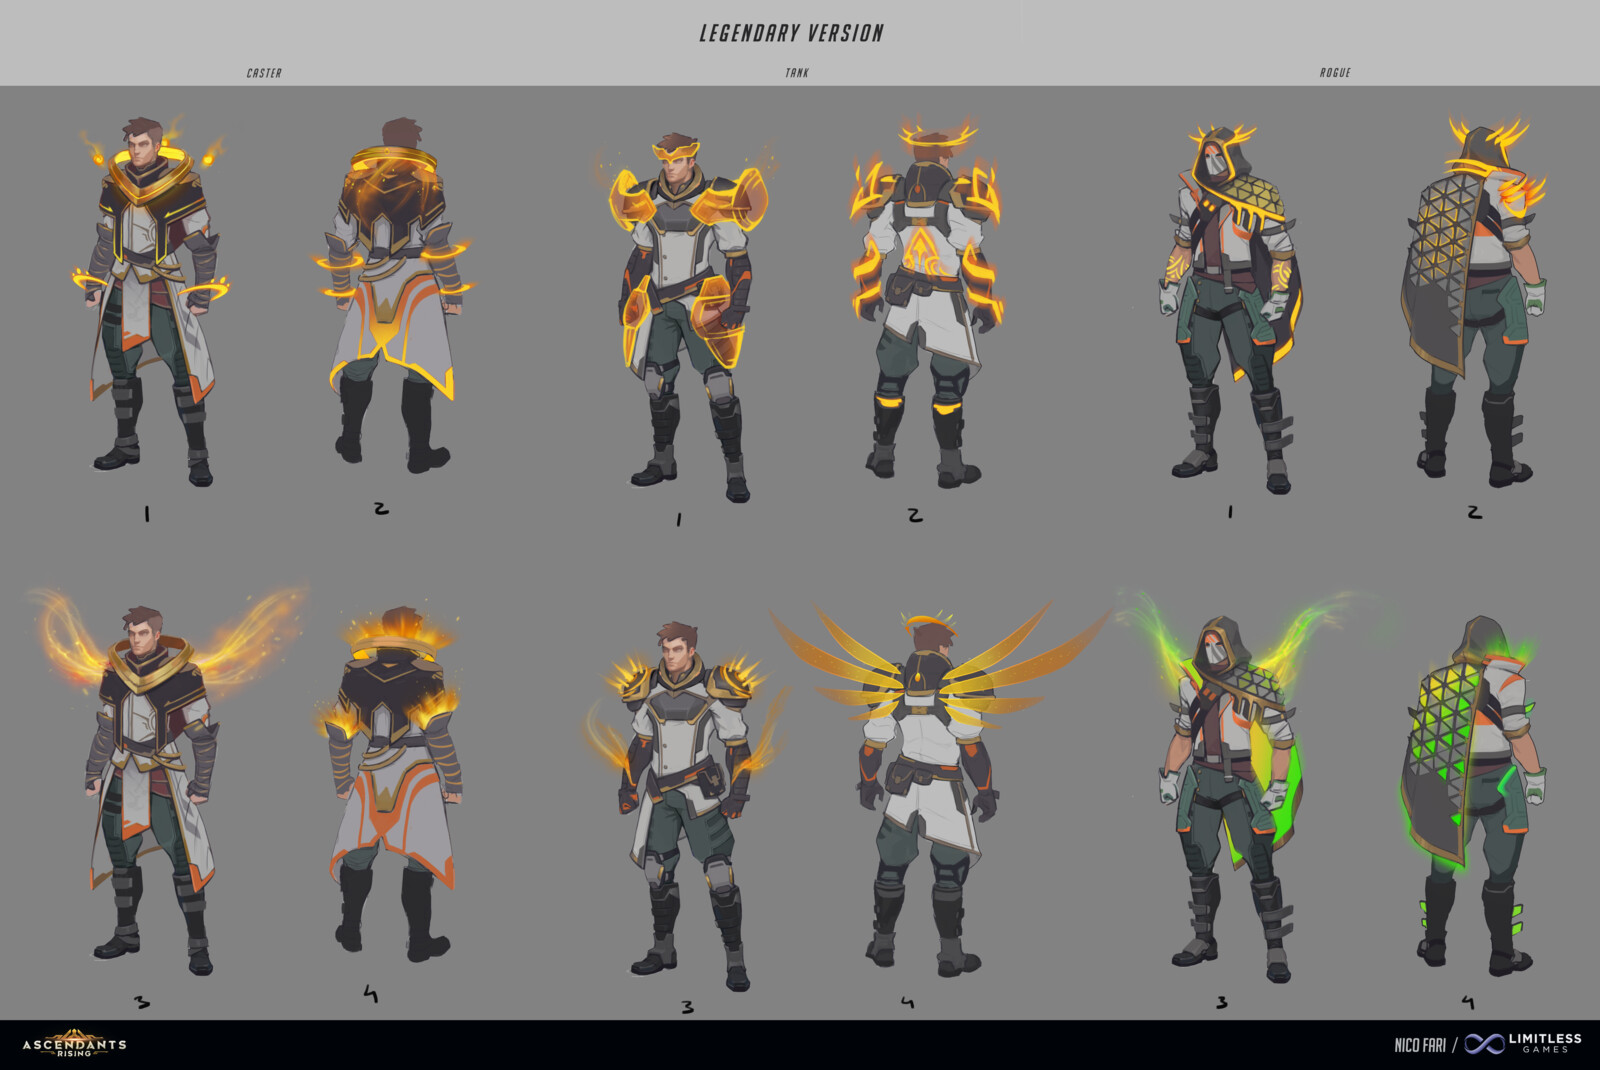 Early concepts for the legendary version of the outfits - VFX only